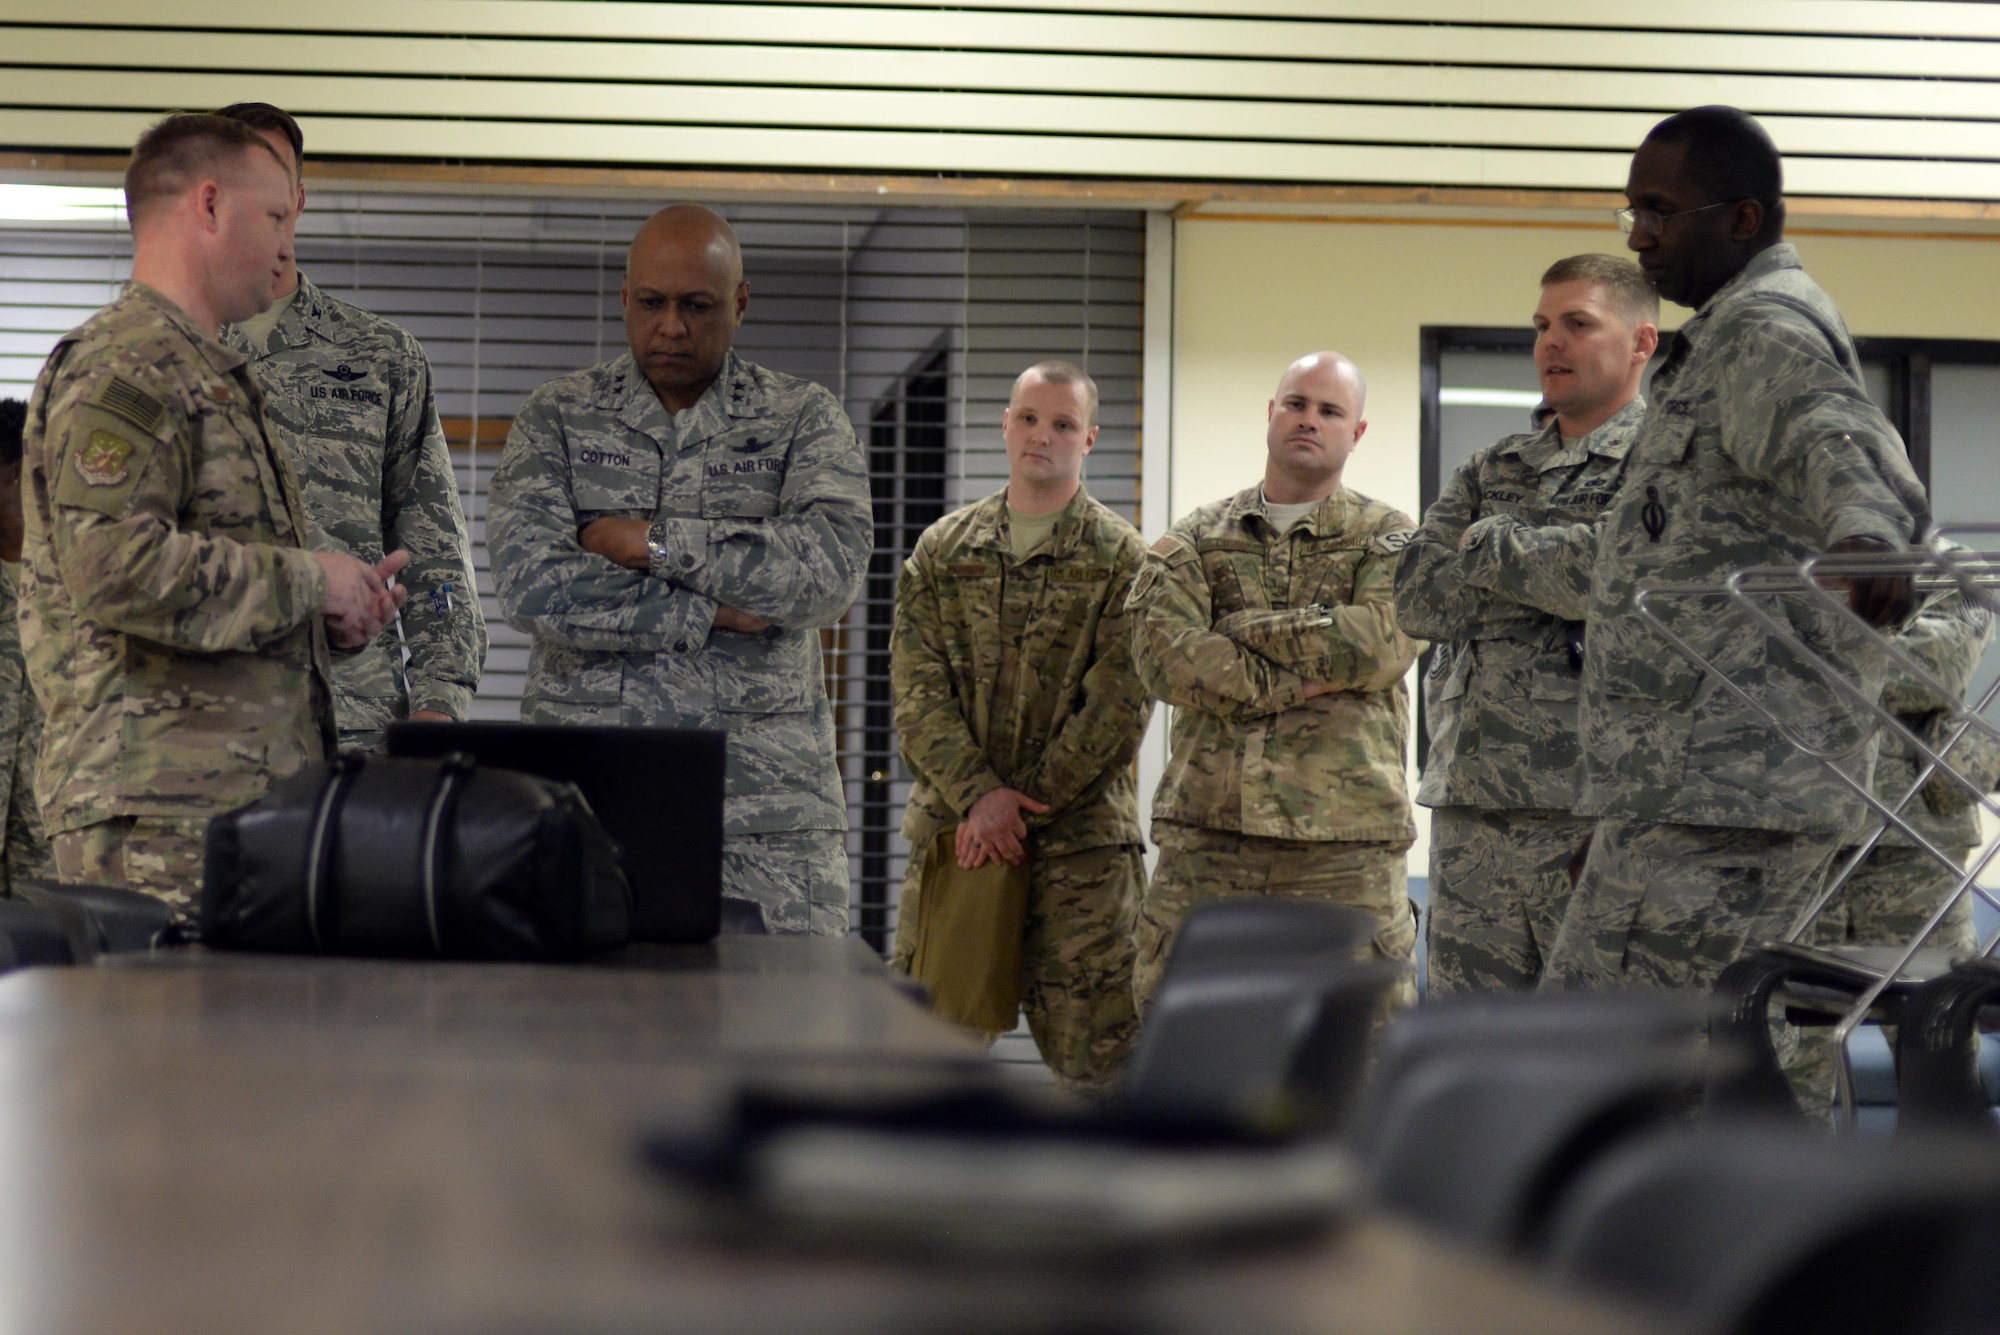 Maj. Gen. Anthony Cotton, 20th Air Force commander, and Airmen watch a training video at Minot Air Force Base, N.D., April 28, 2017. Cotton visited the 91st Security Forces Squadron’s training building and a missile alert facility during his tour of the base. (U.S. Air Force photo/Airman 1st Class Austin M. Thomas)